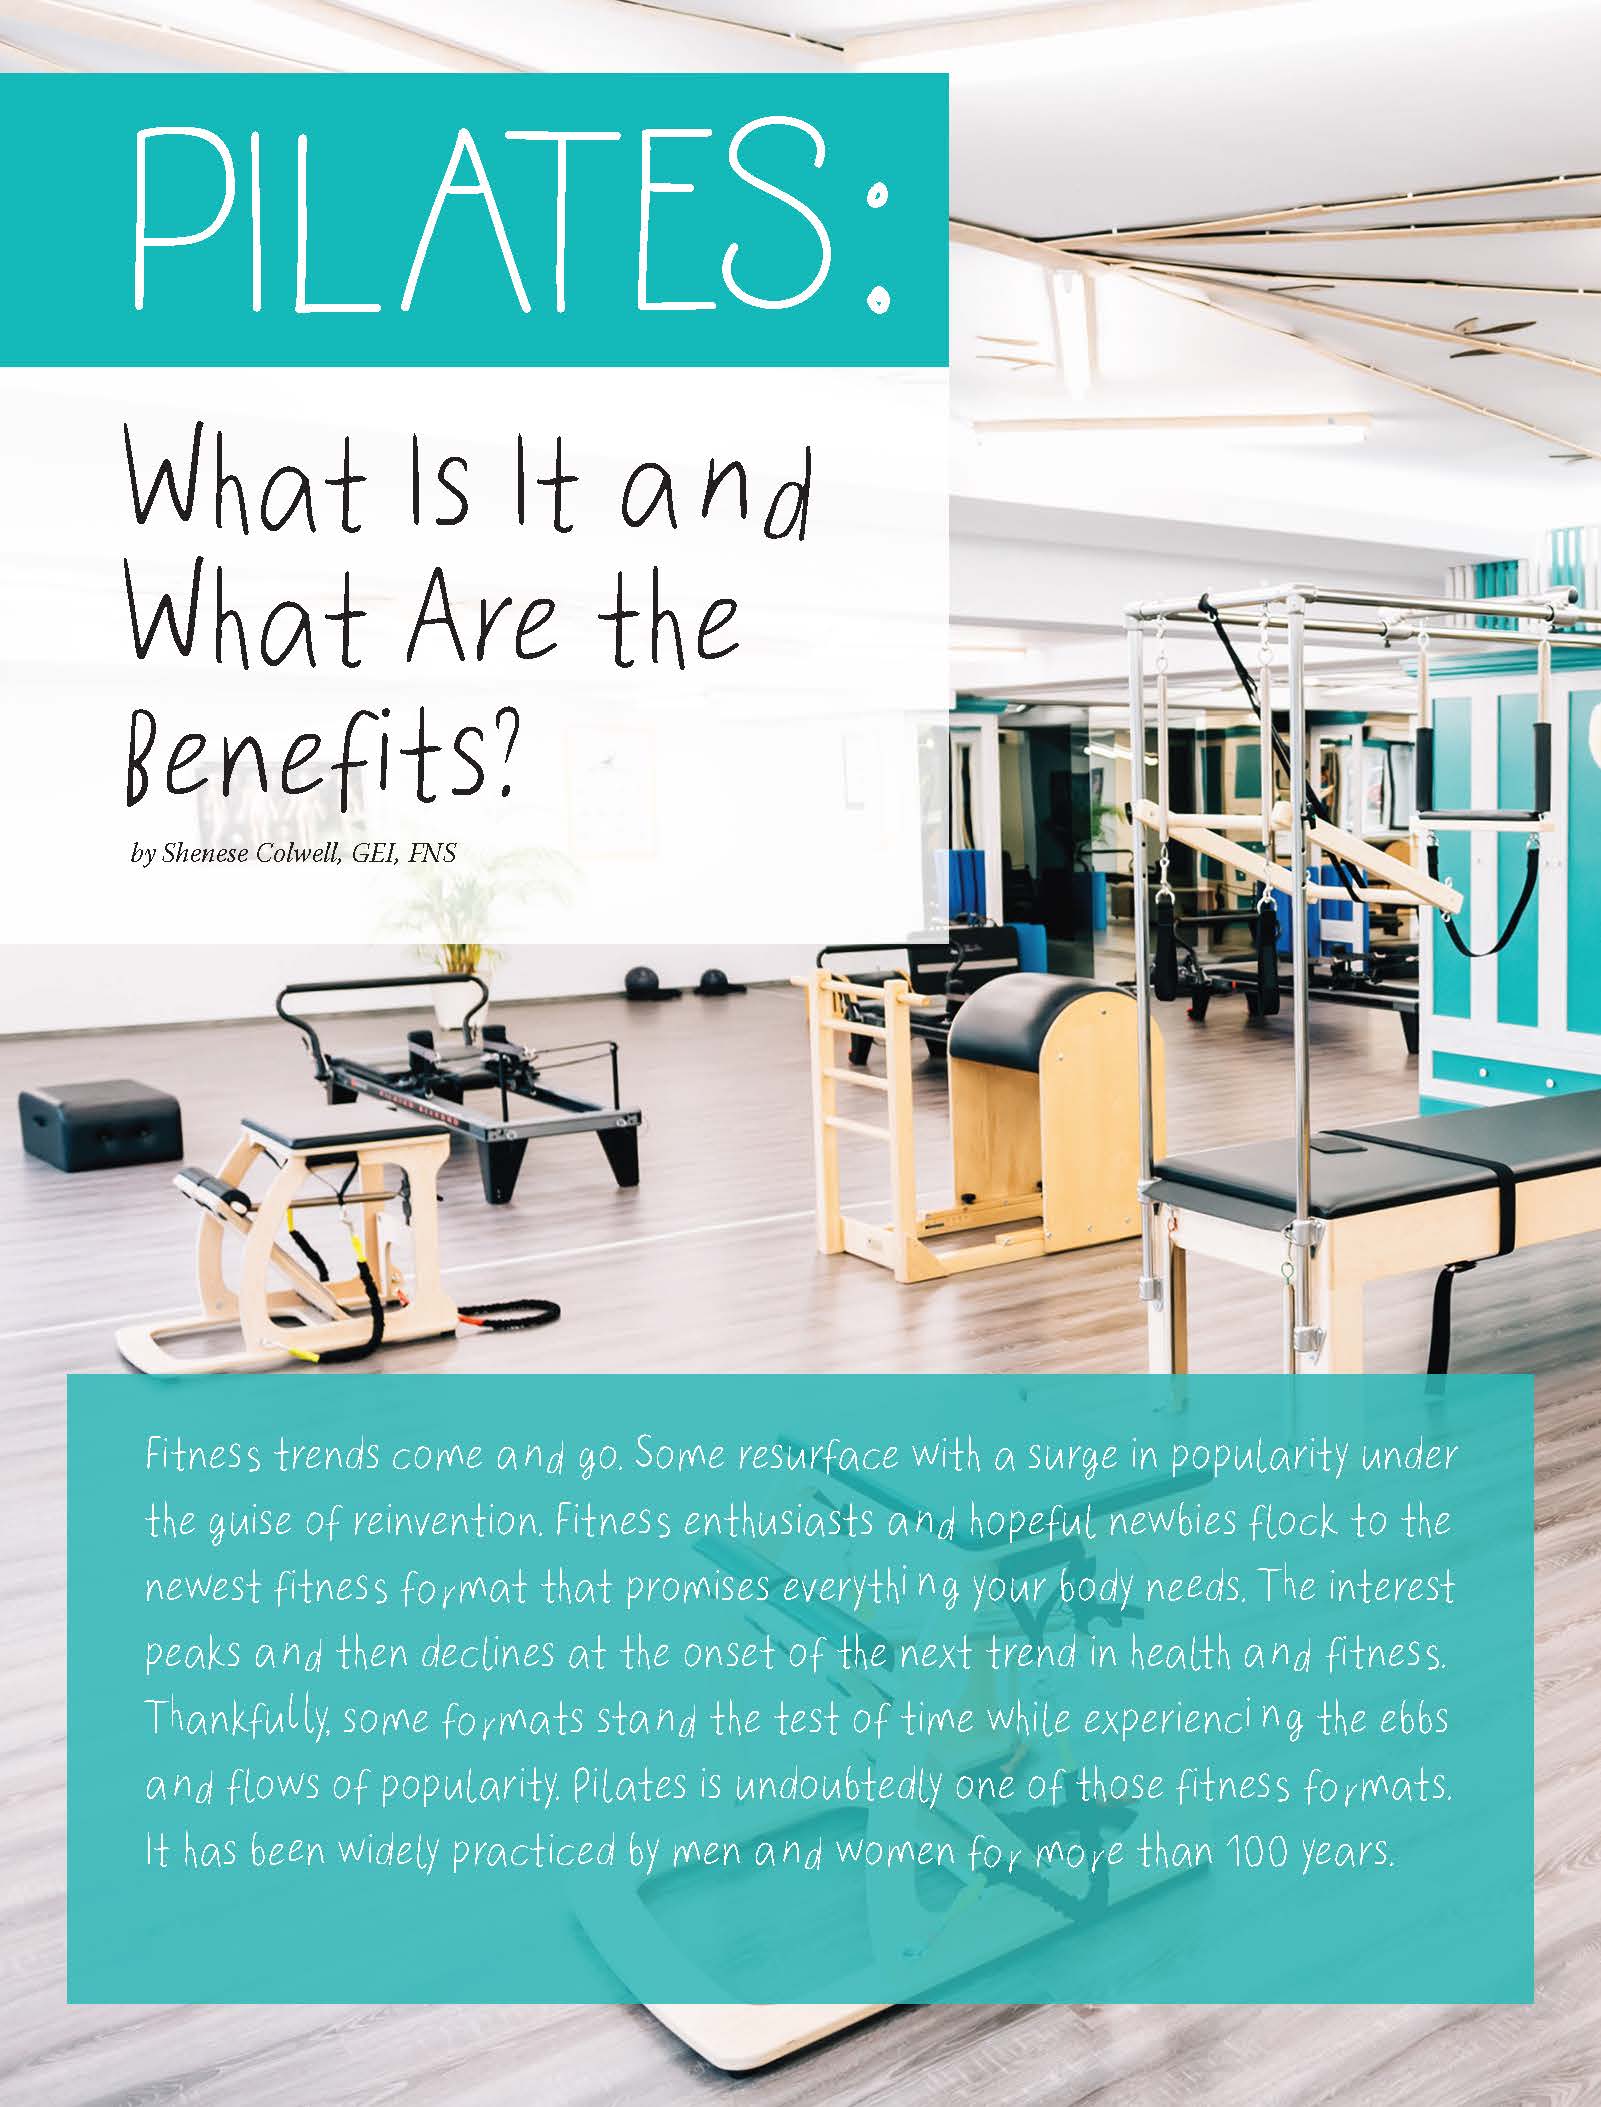 Pilates: What Is It and What Are the Benefits? - Obesity Action